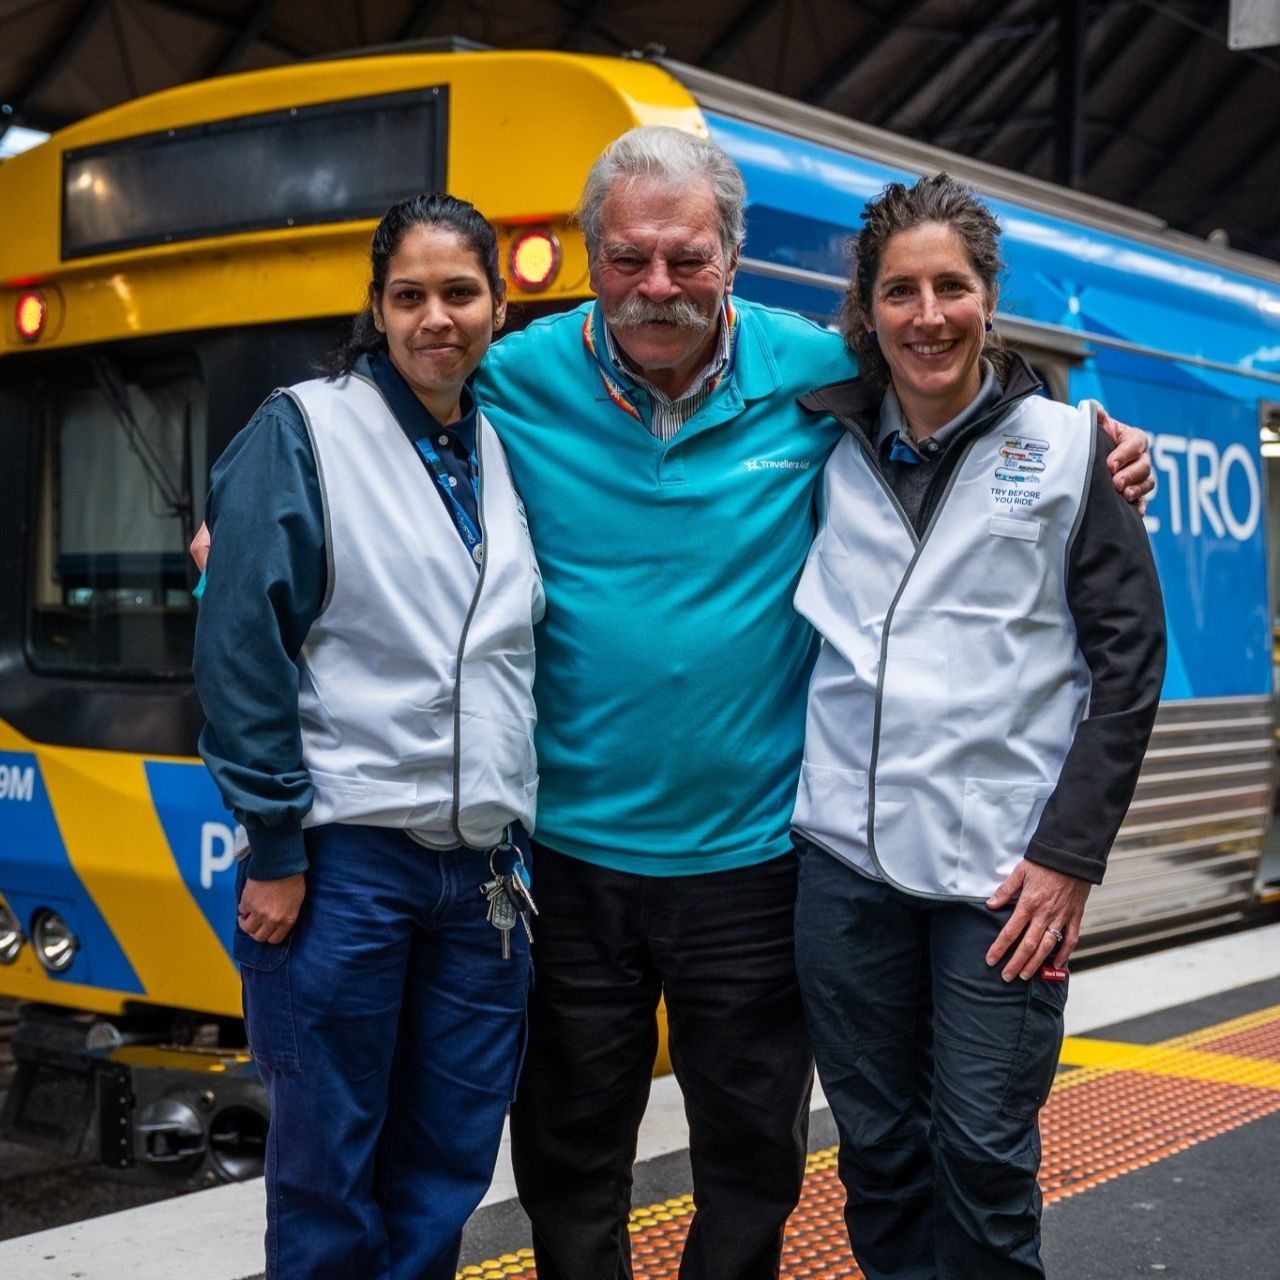 Over 130 people attend Try Before You Ride at Southern Cross Station, building their confidence in accessing public transport.